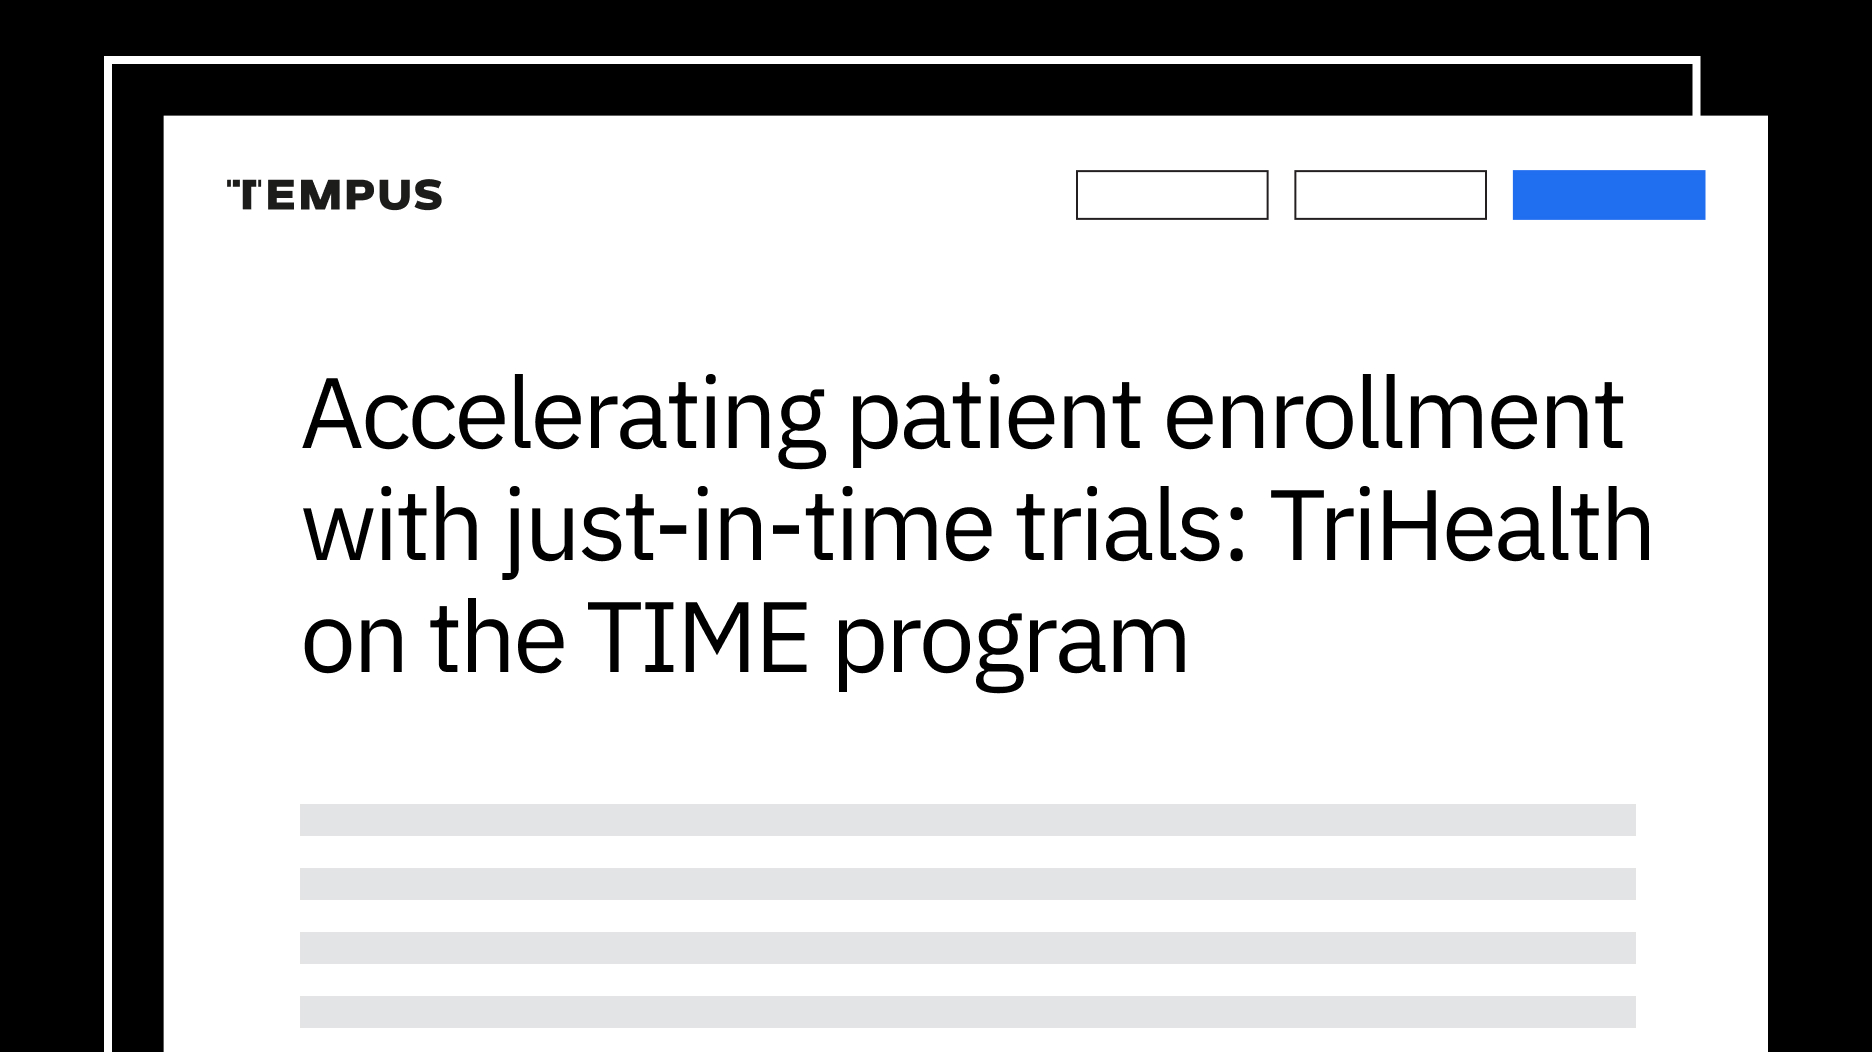 Accelerating patient enrollment with just-in-time trials: TriHealth on the TIME program